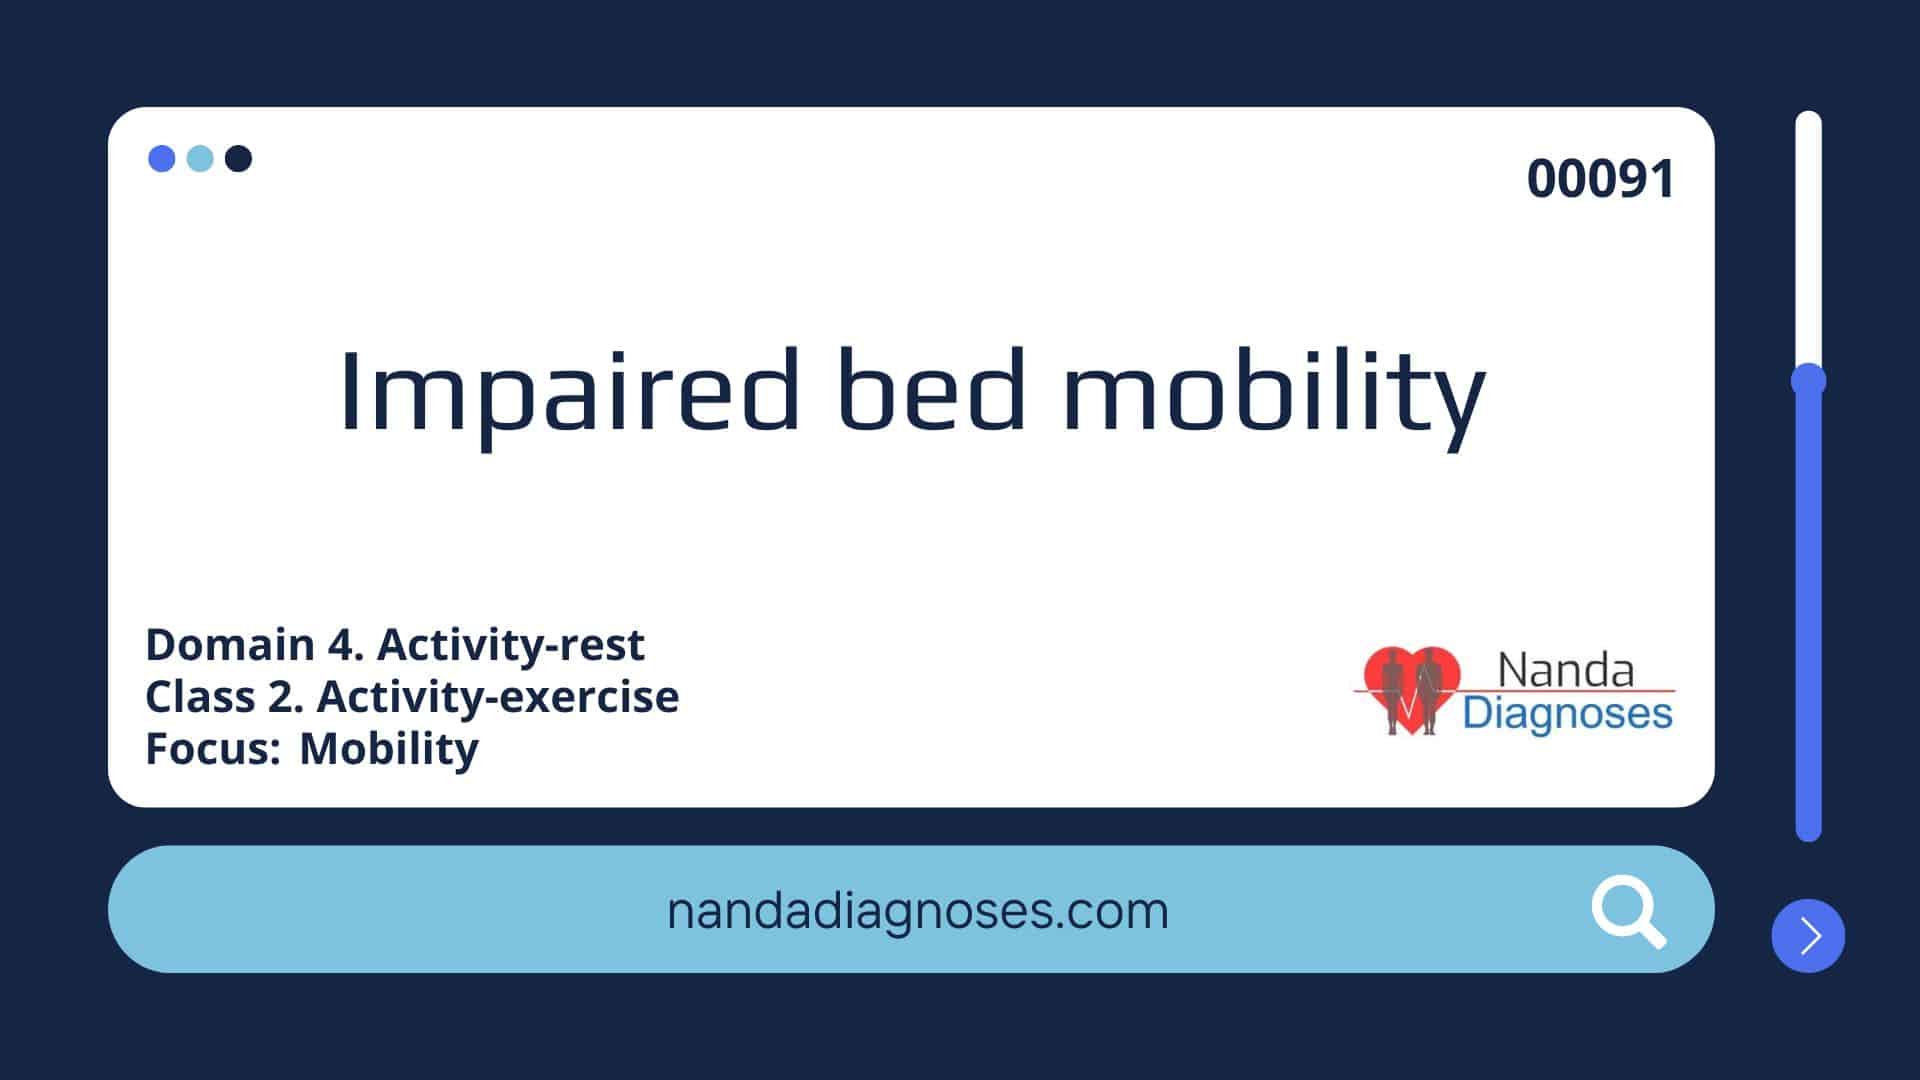 Nursing diagnosis Impaired bed mobility